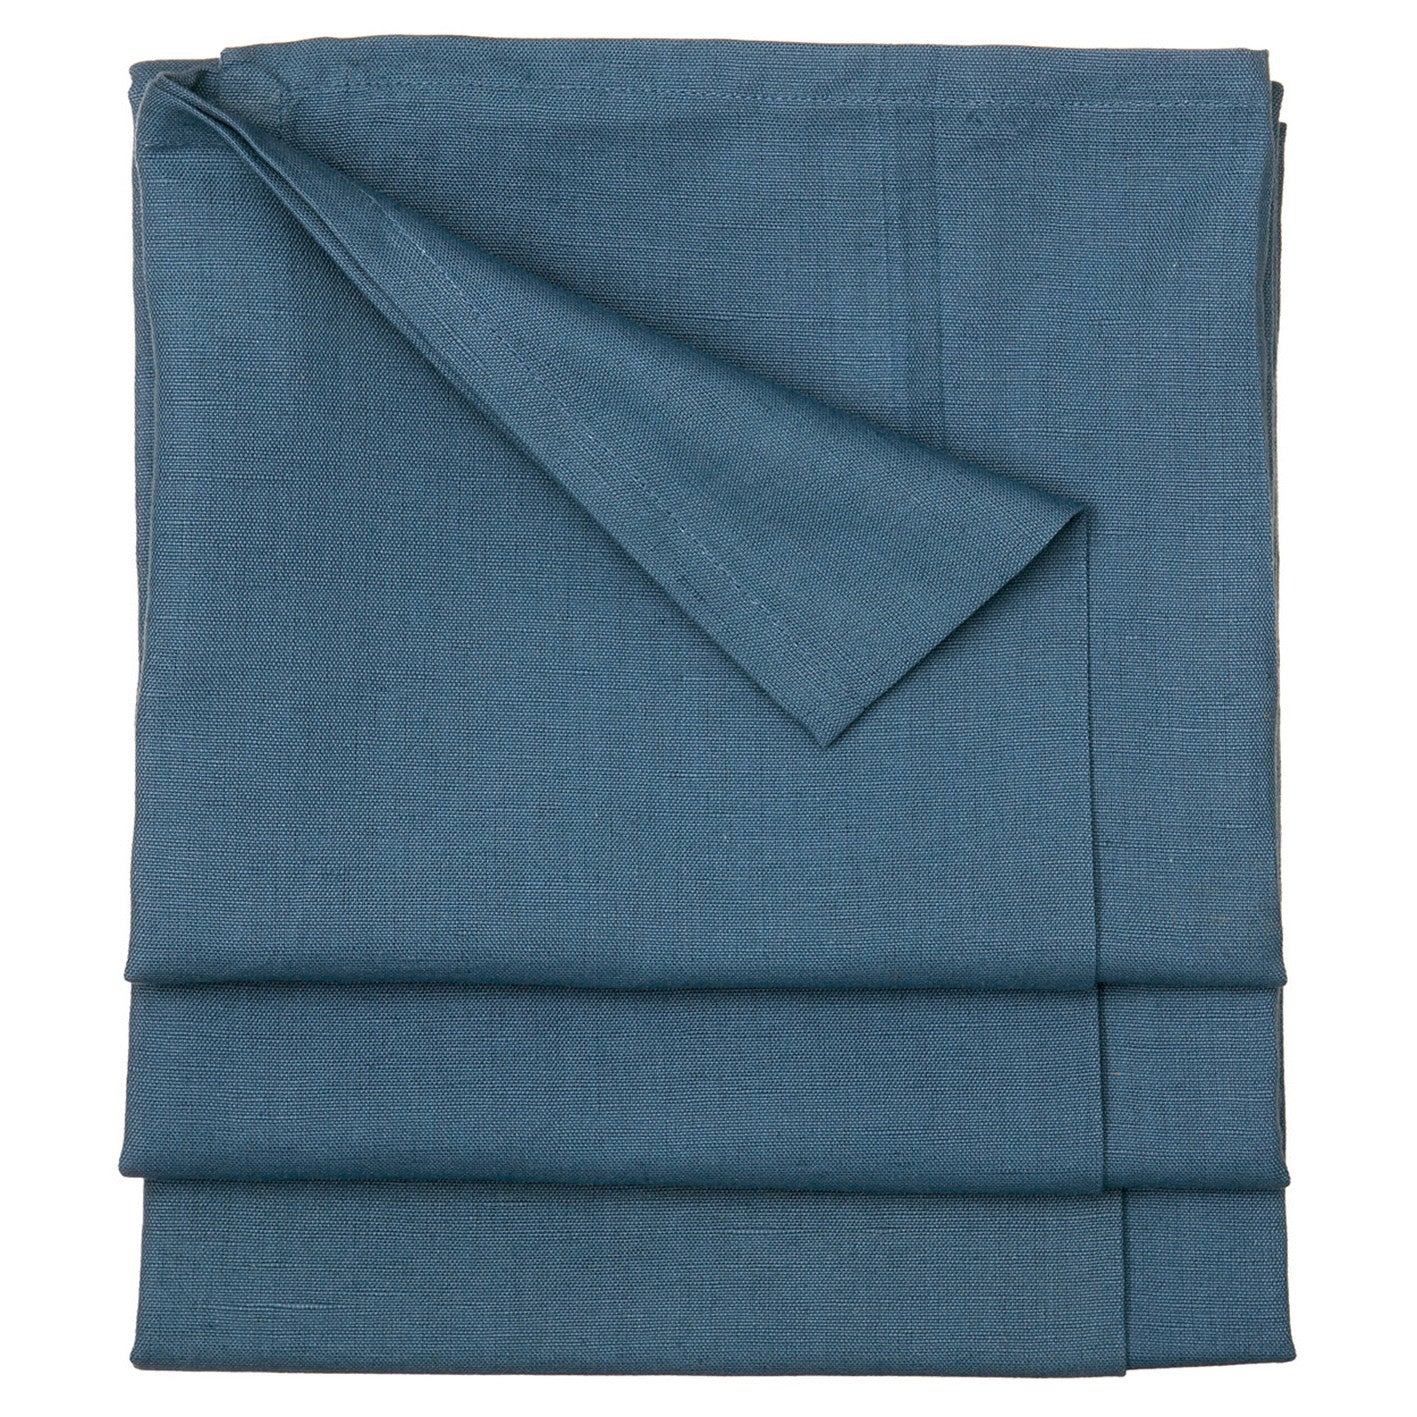 Solid Dyed Linen Cotton Union Tablecloth in Dark Petrol Blue Stain Resistant finish Canada USA